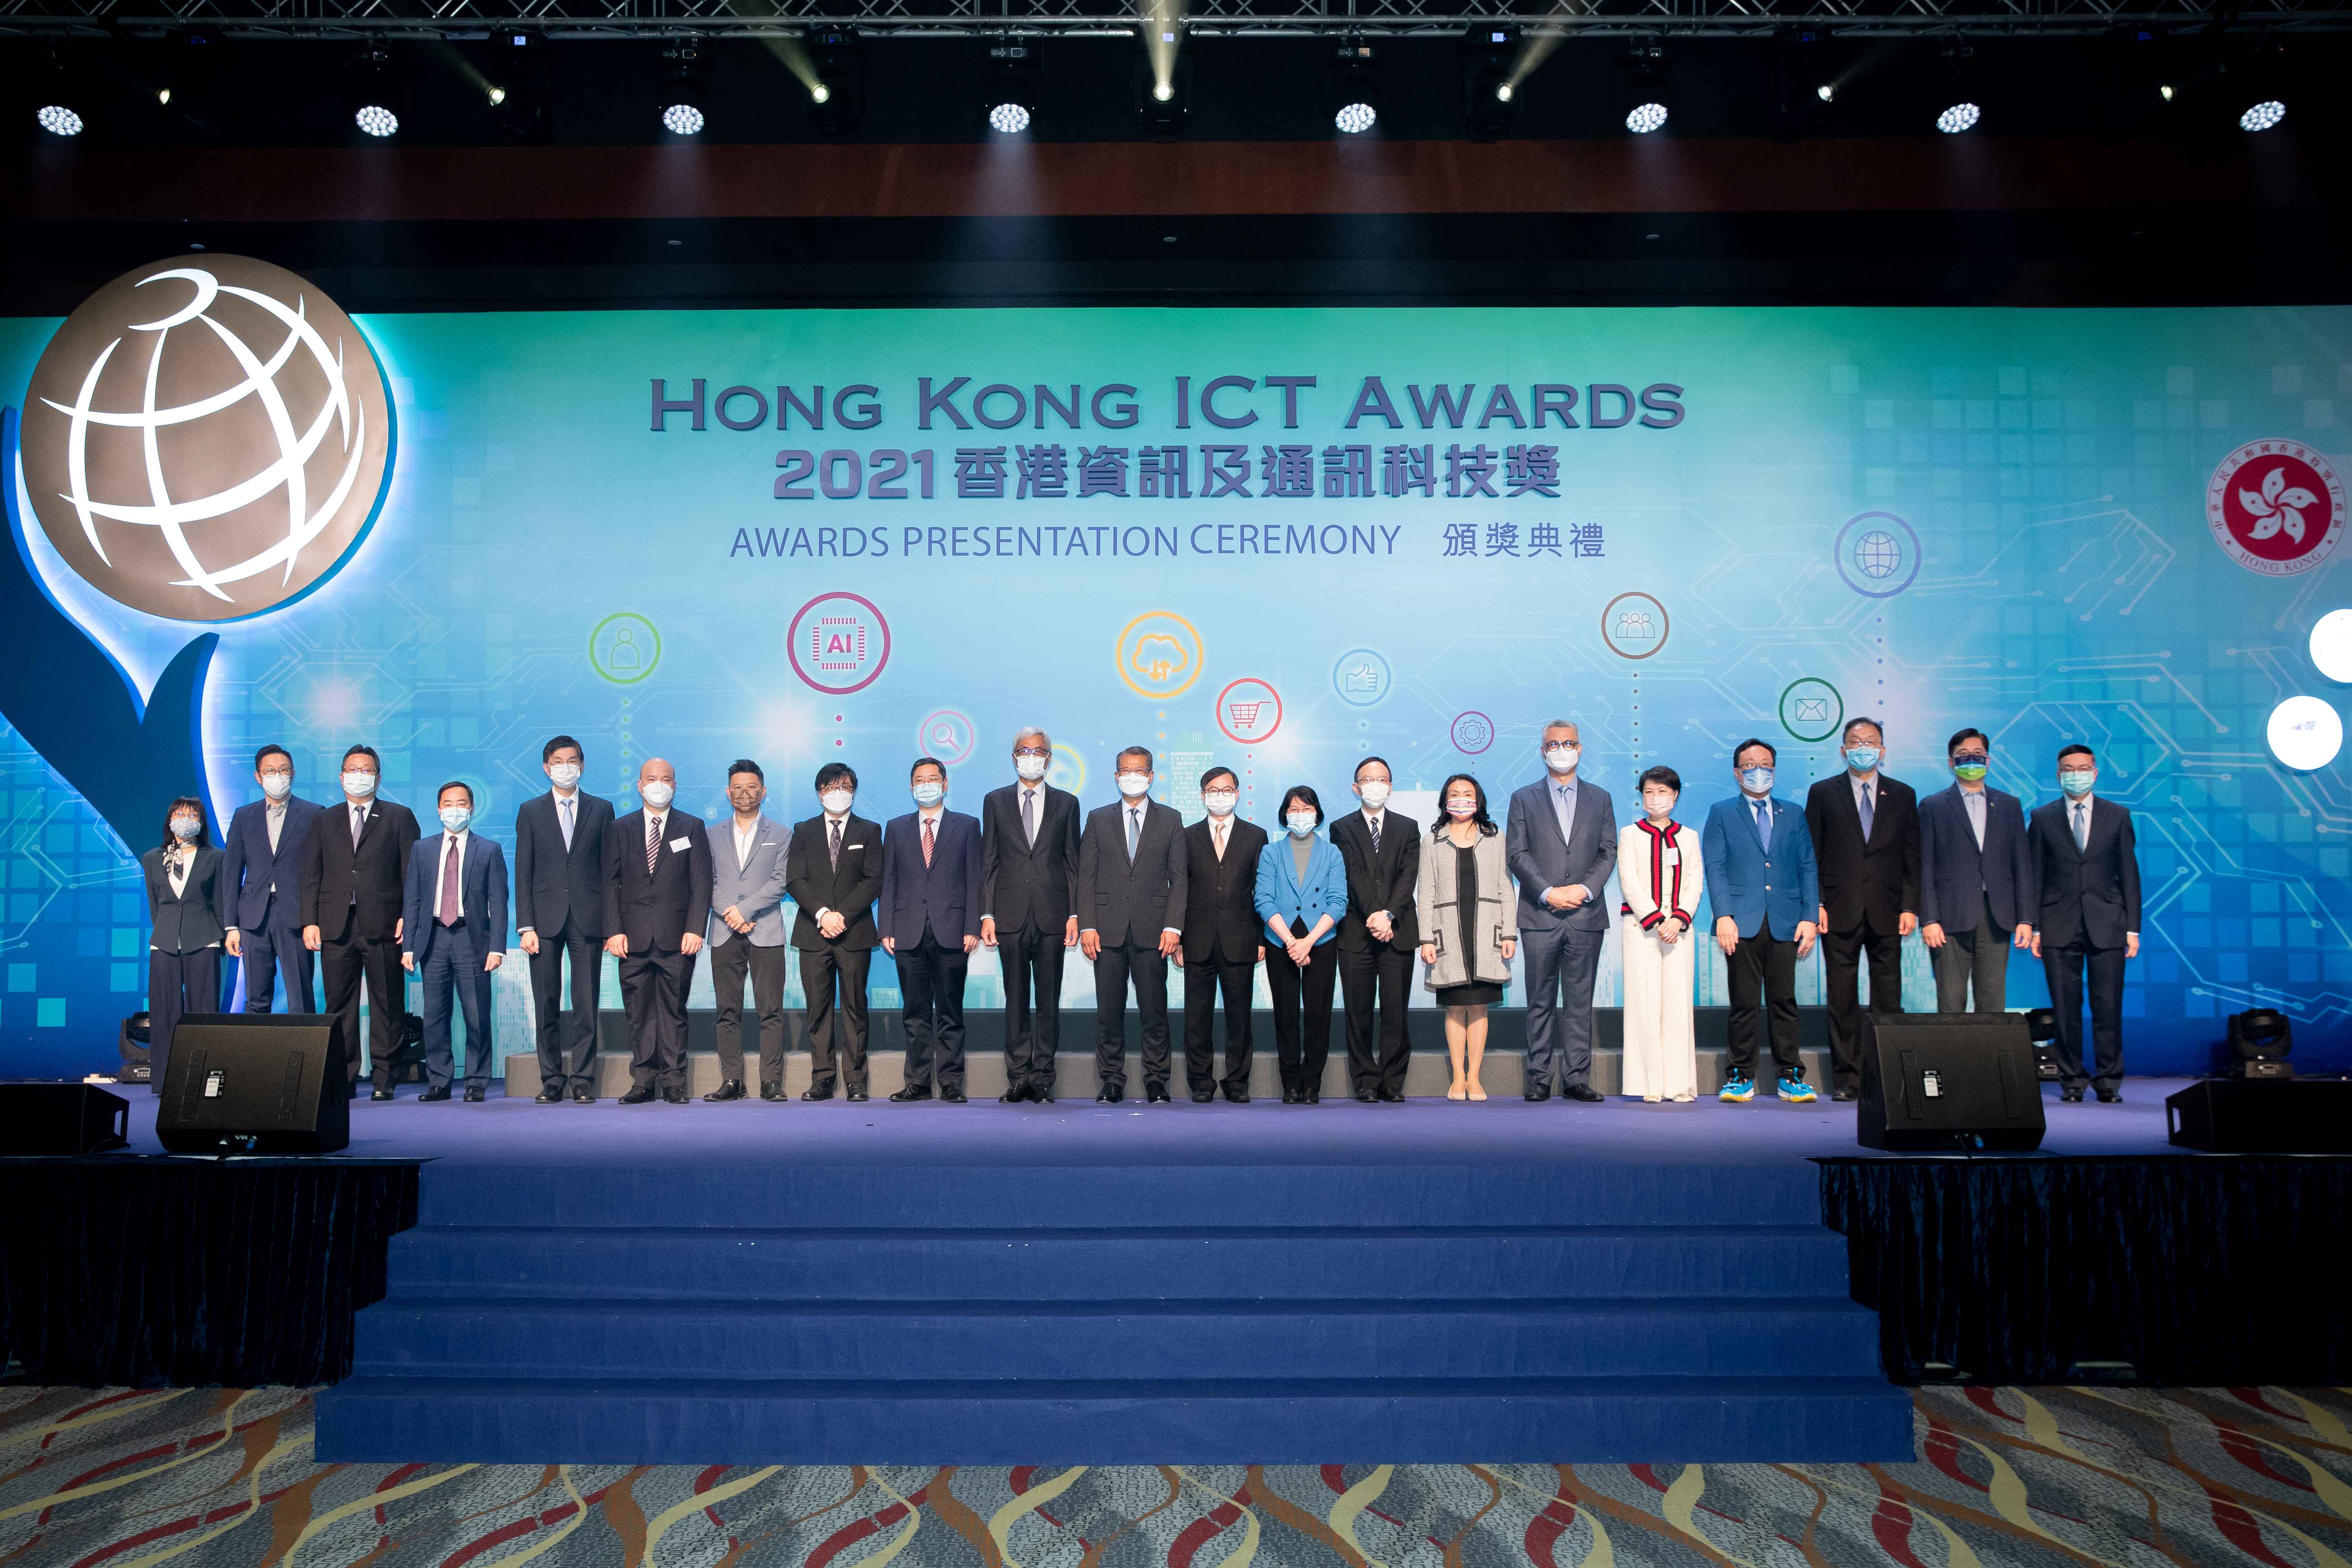 Hong Kong ICT Awards 2021 Awards Presentation Ceremony VIPs, Leading Organisers & Steering Committee Group Photo